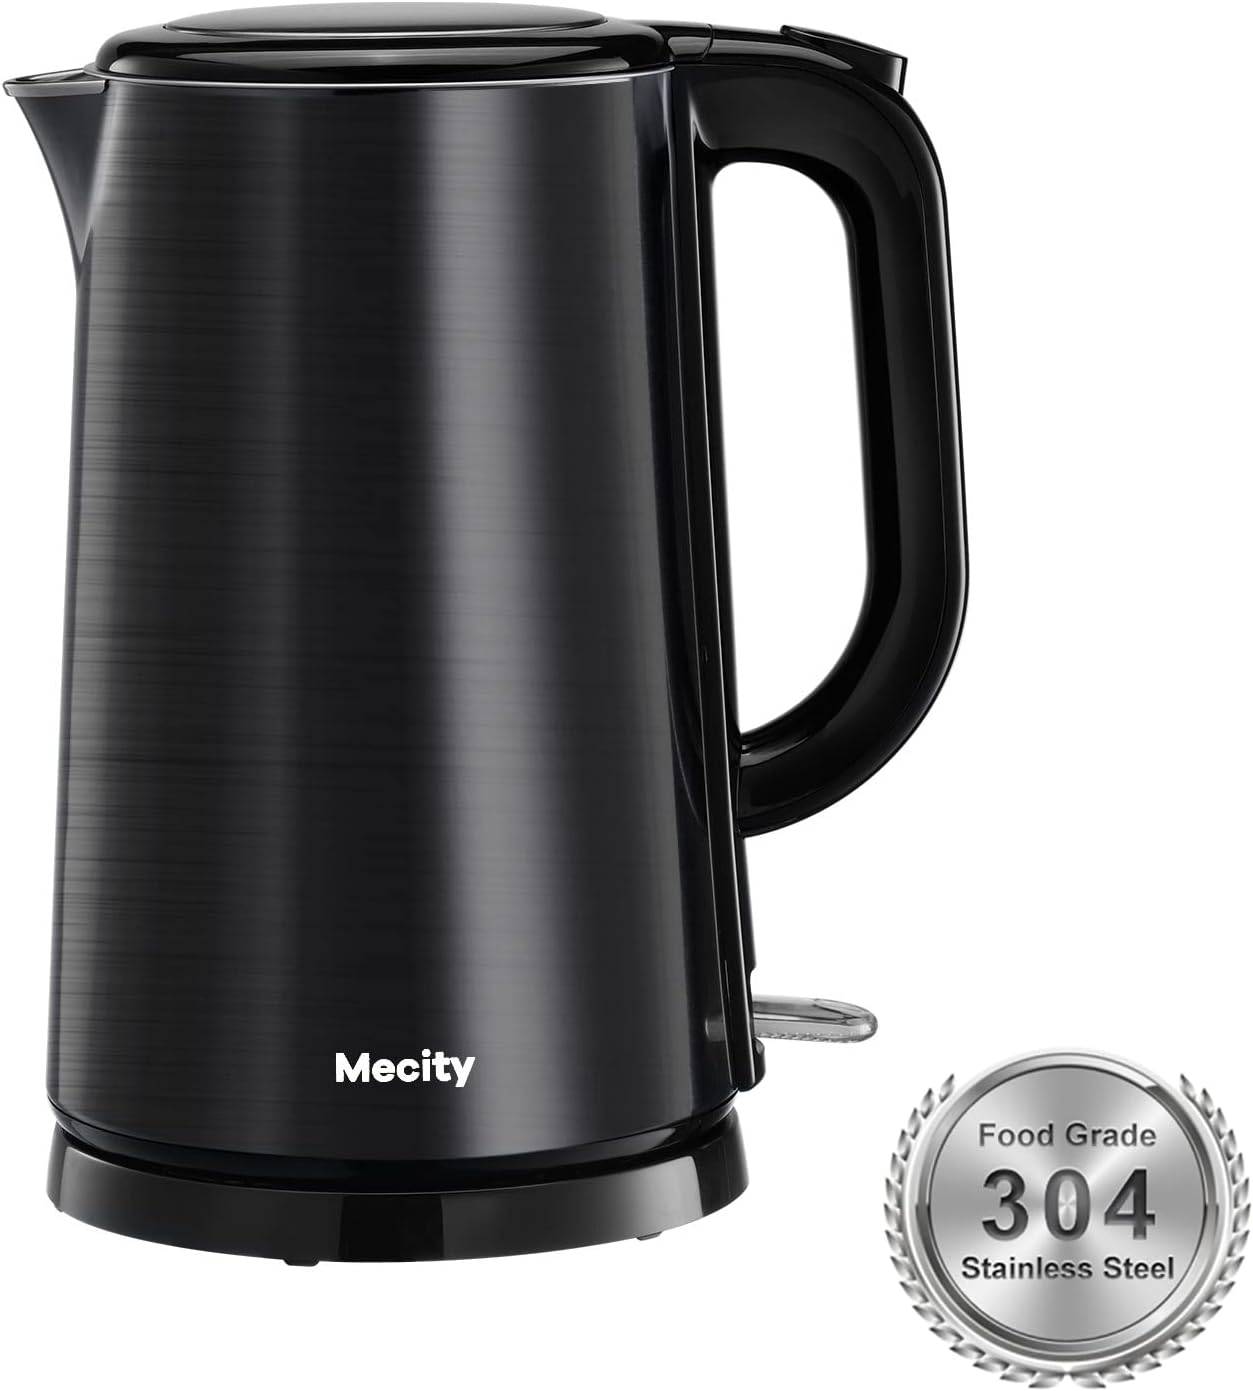 Mecity 1.7L Electric Kettle 100% Stainless Steel Interior Fast Heating Water Kettle Double Wall Kettle Water Boiler, Cool Touch Auto Shut Off, 57 Ounce, 120V, 1500W